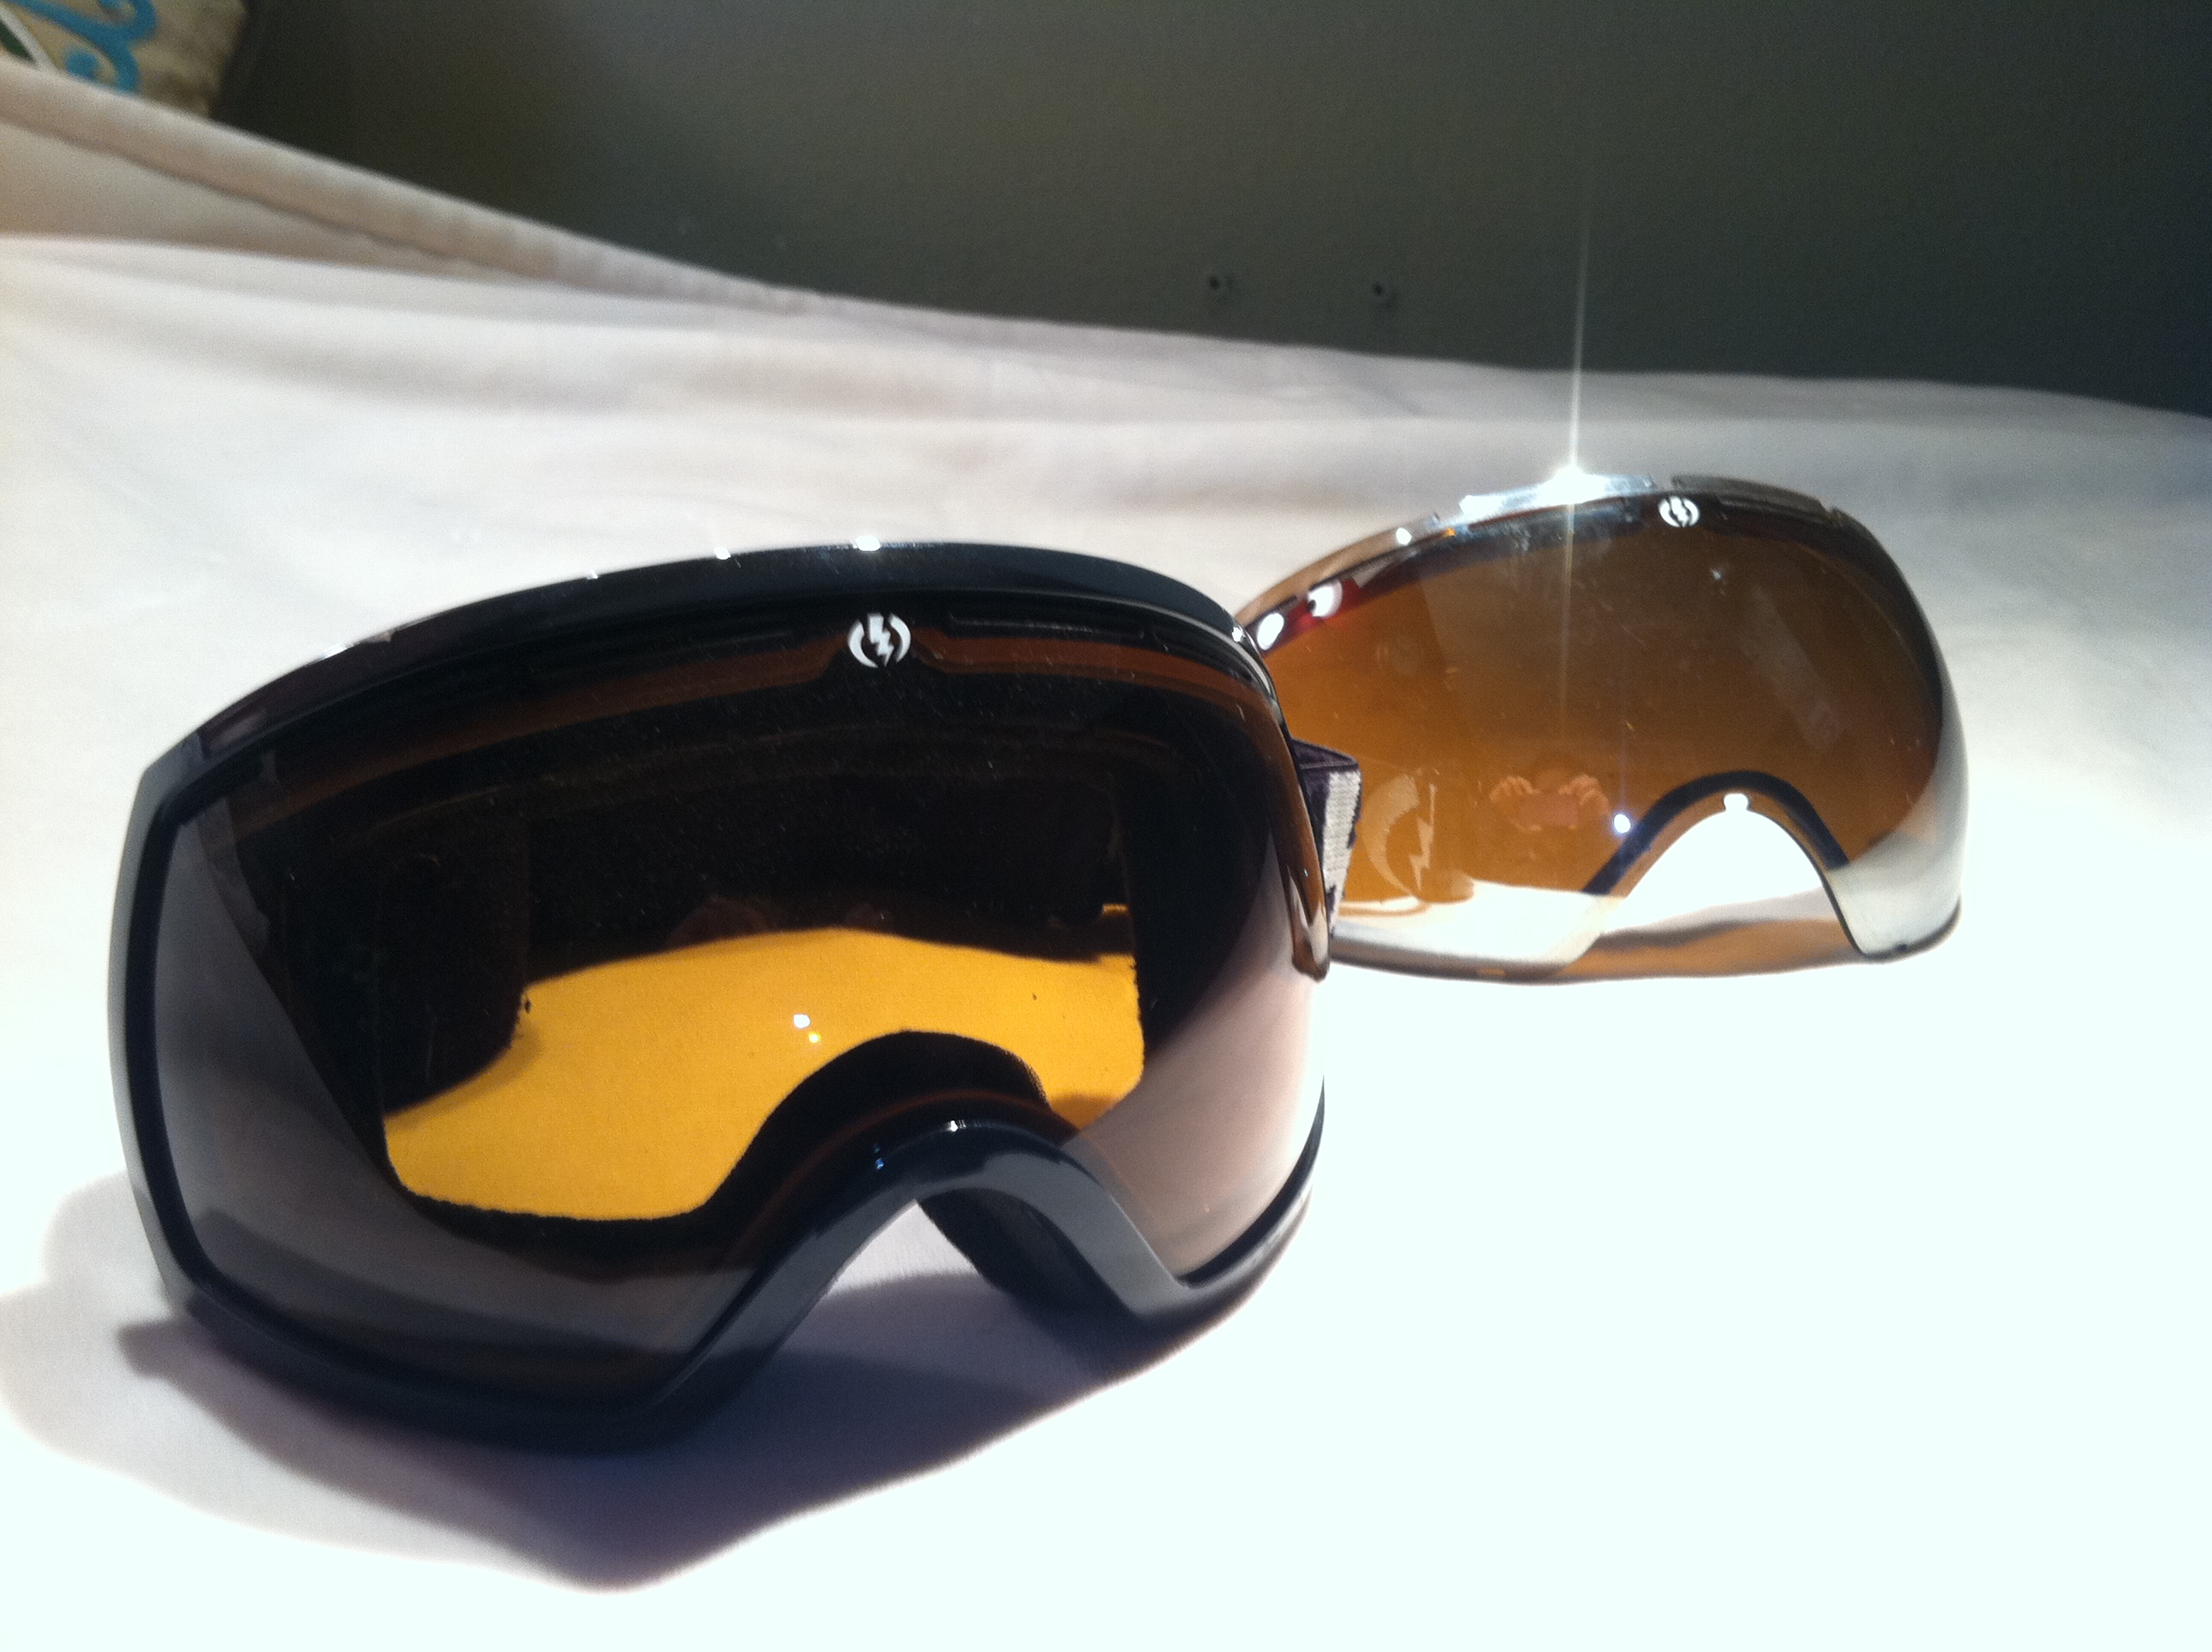 SALE! K2 Snowboards, Goggles (EG2's, SPY, Native) LDC pants, and more ...